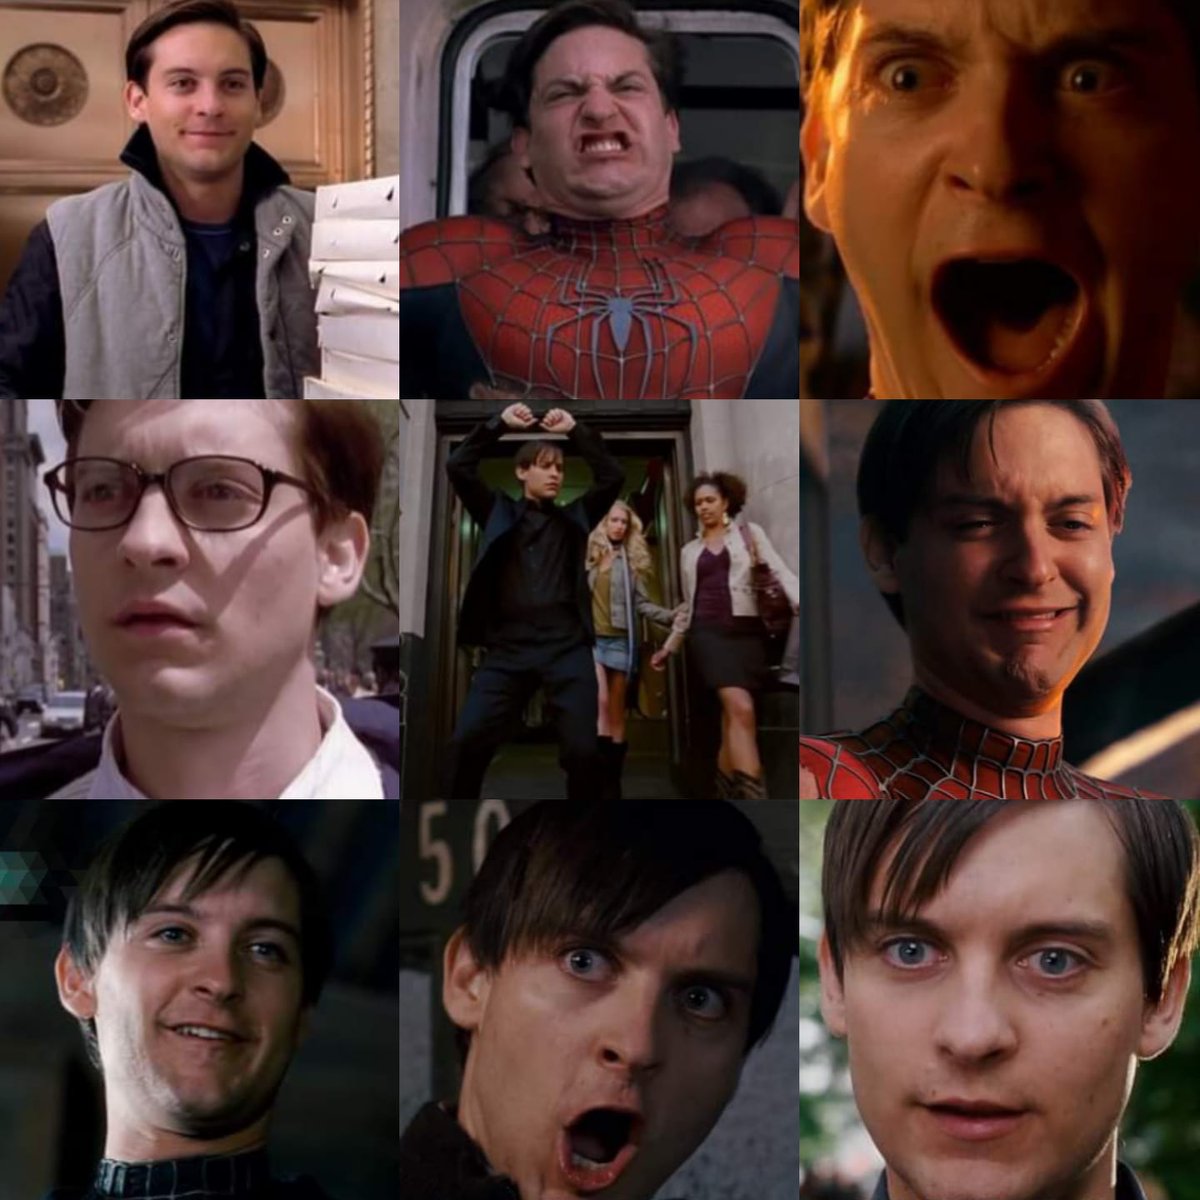 Happy Birthday Tobey Maguire(27/6)🎂🎉🎊
(Another iconic face of him)
Edited by myself
#spidermanactor
#marvelcinematicuniverse 
#actorbirthday
#photocollage